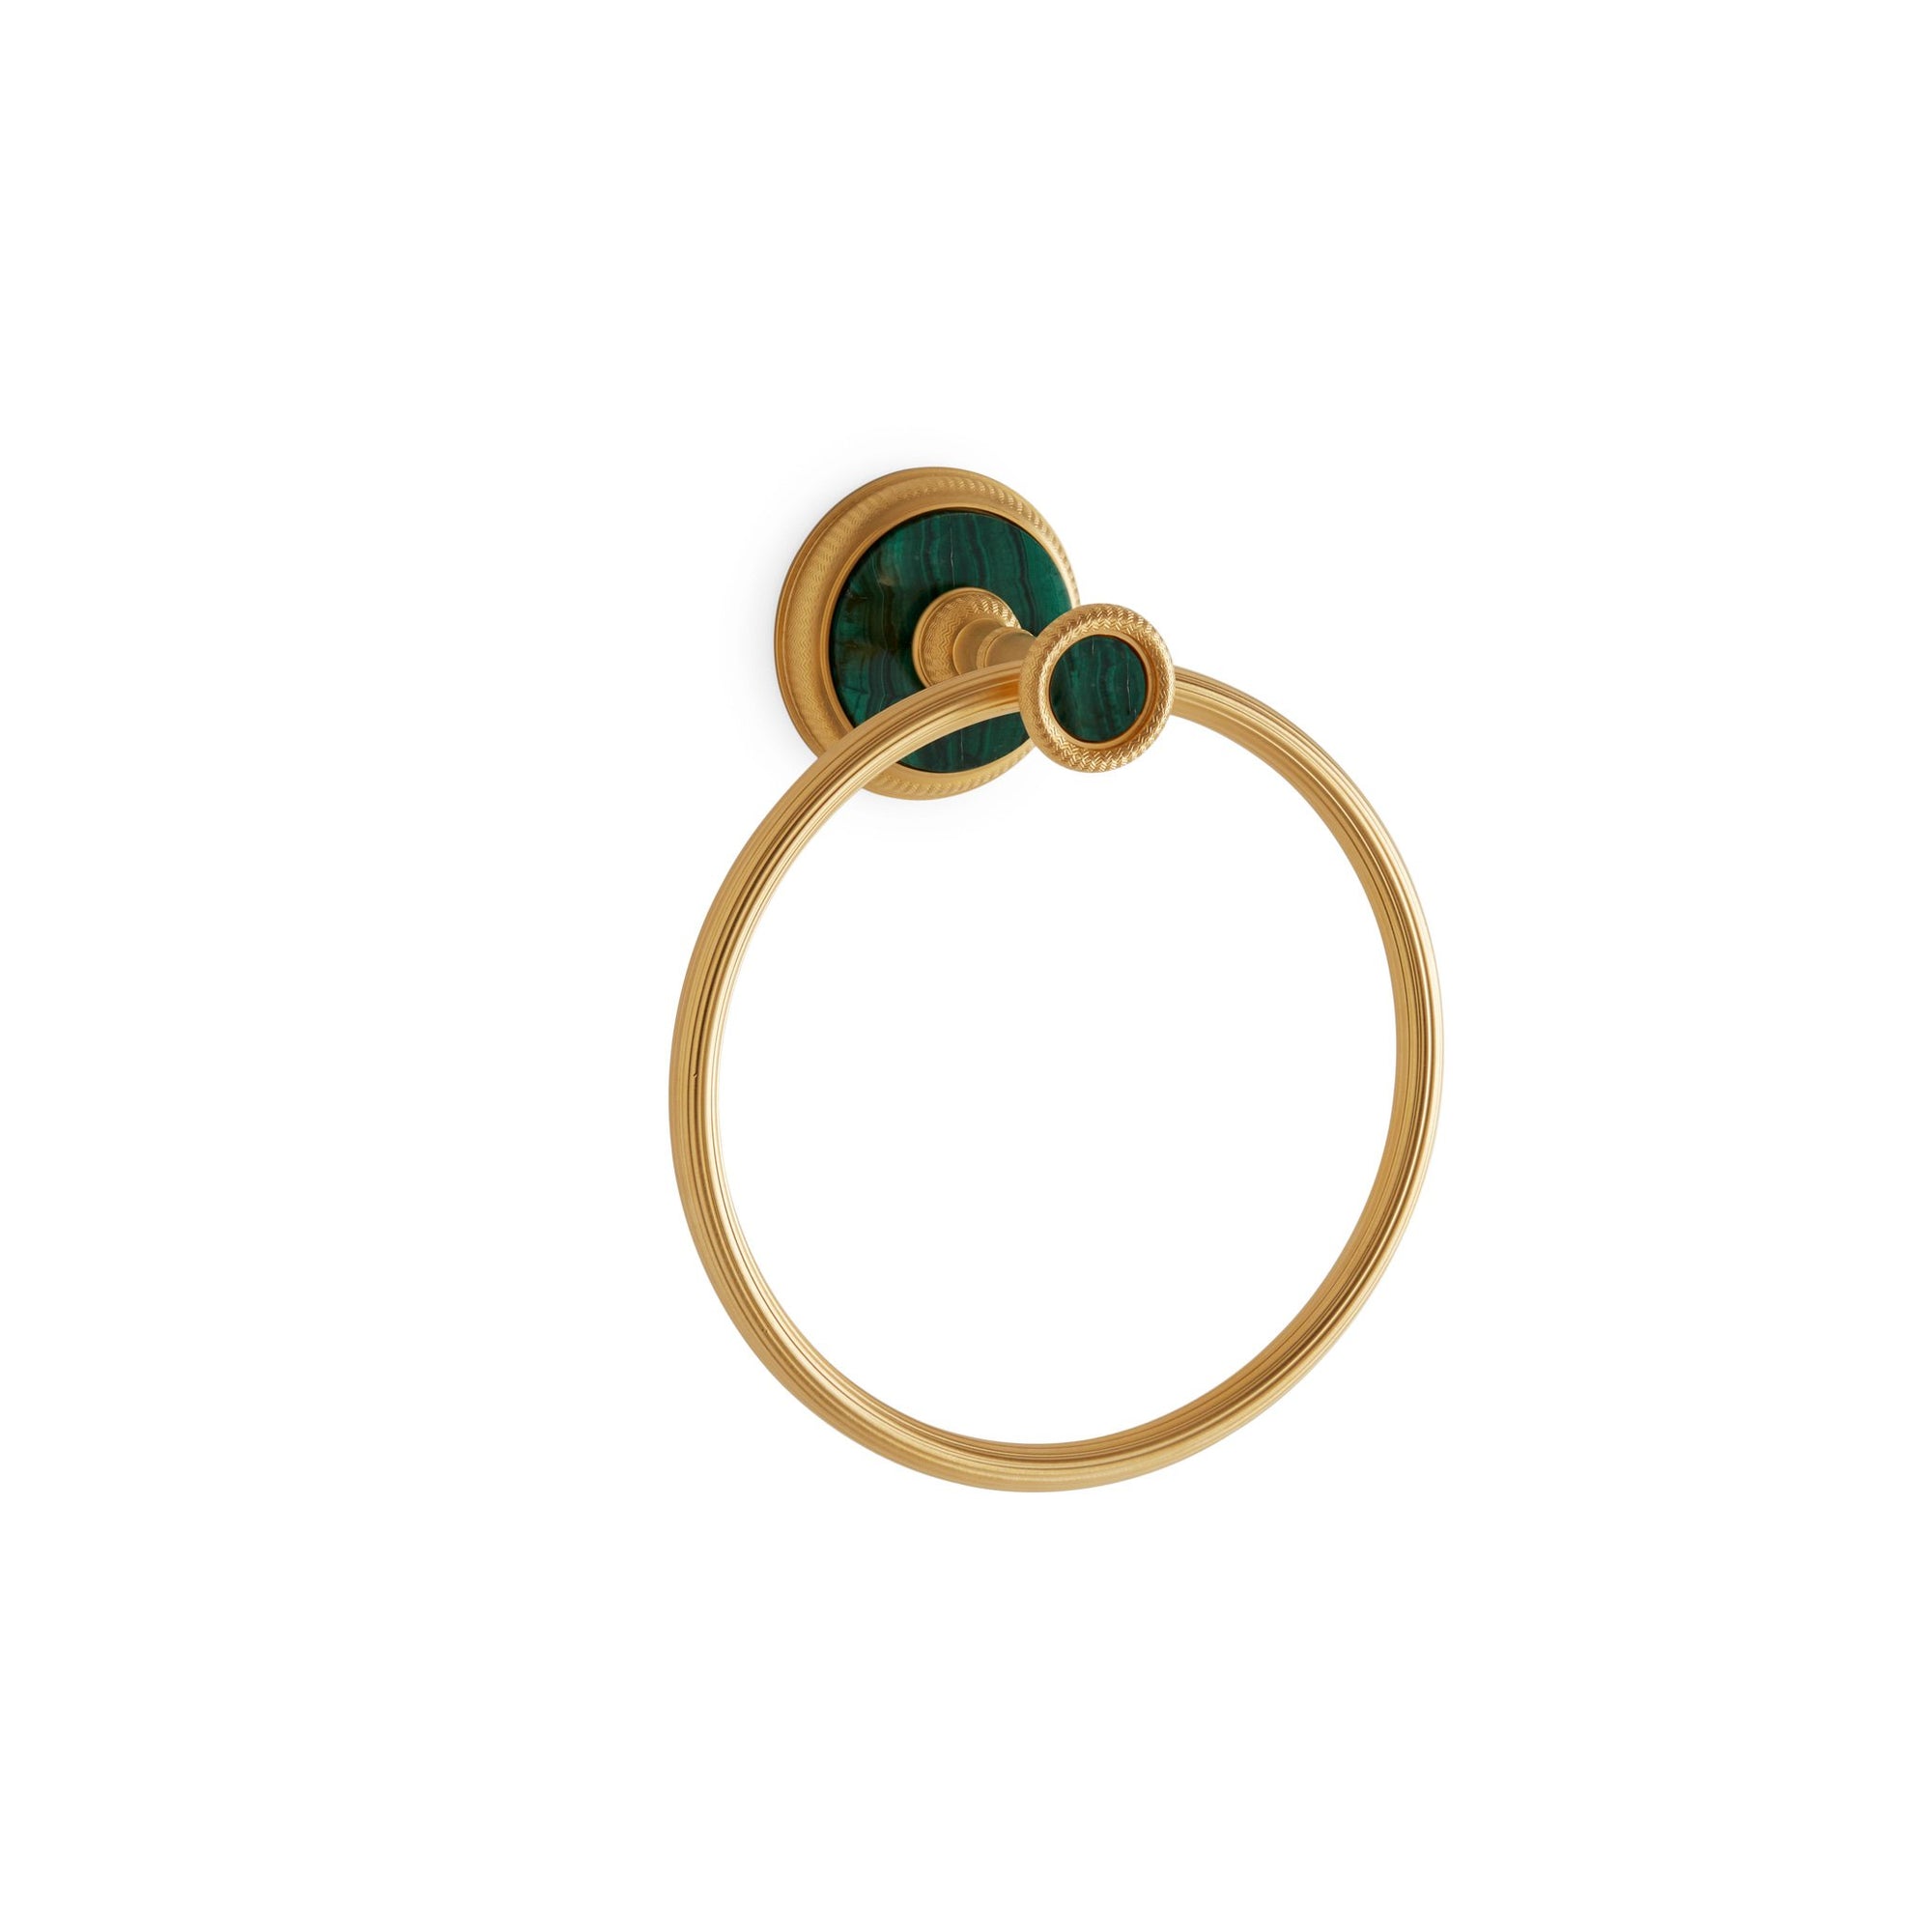 3442-MALA-GP Sherle Wagner International Knurled Towel Ring with Malachite insert in Gold Plate metal finish